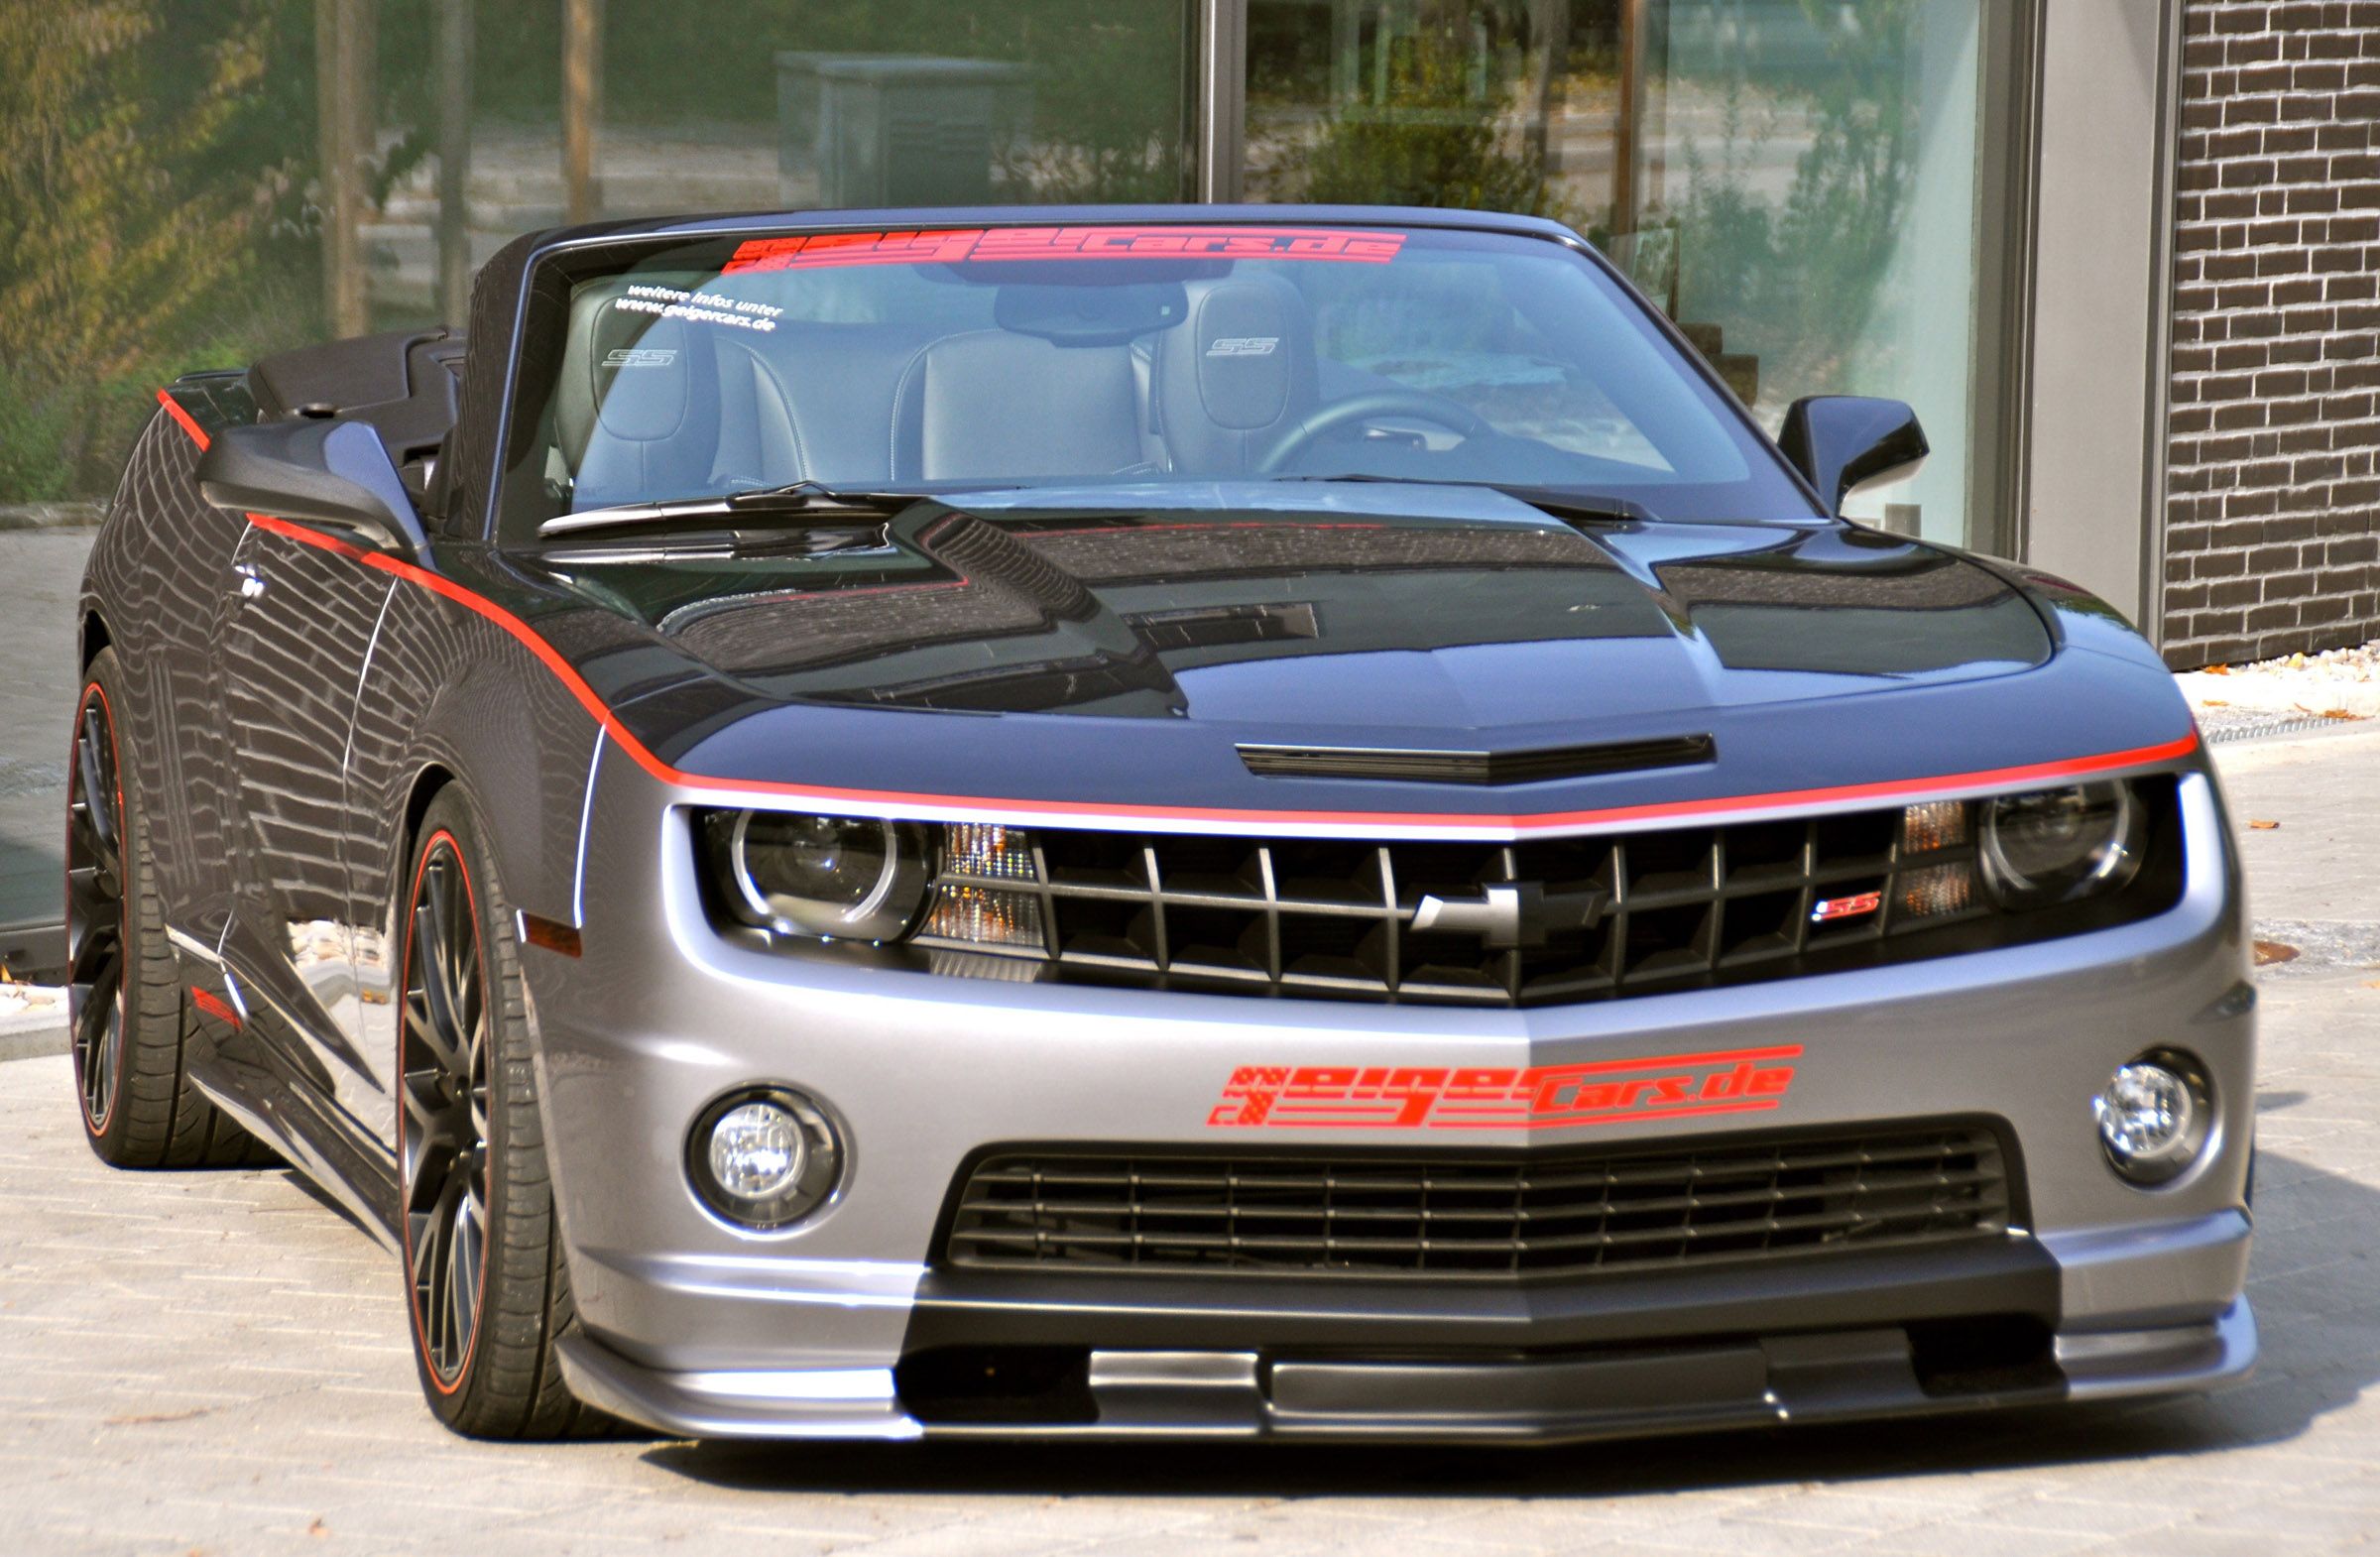 2012 Chevrolet Camaro 2SS Convertible by Geiger Cars